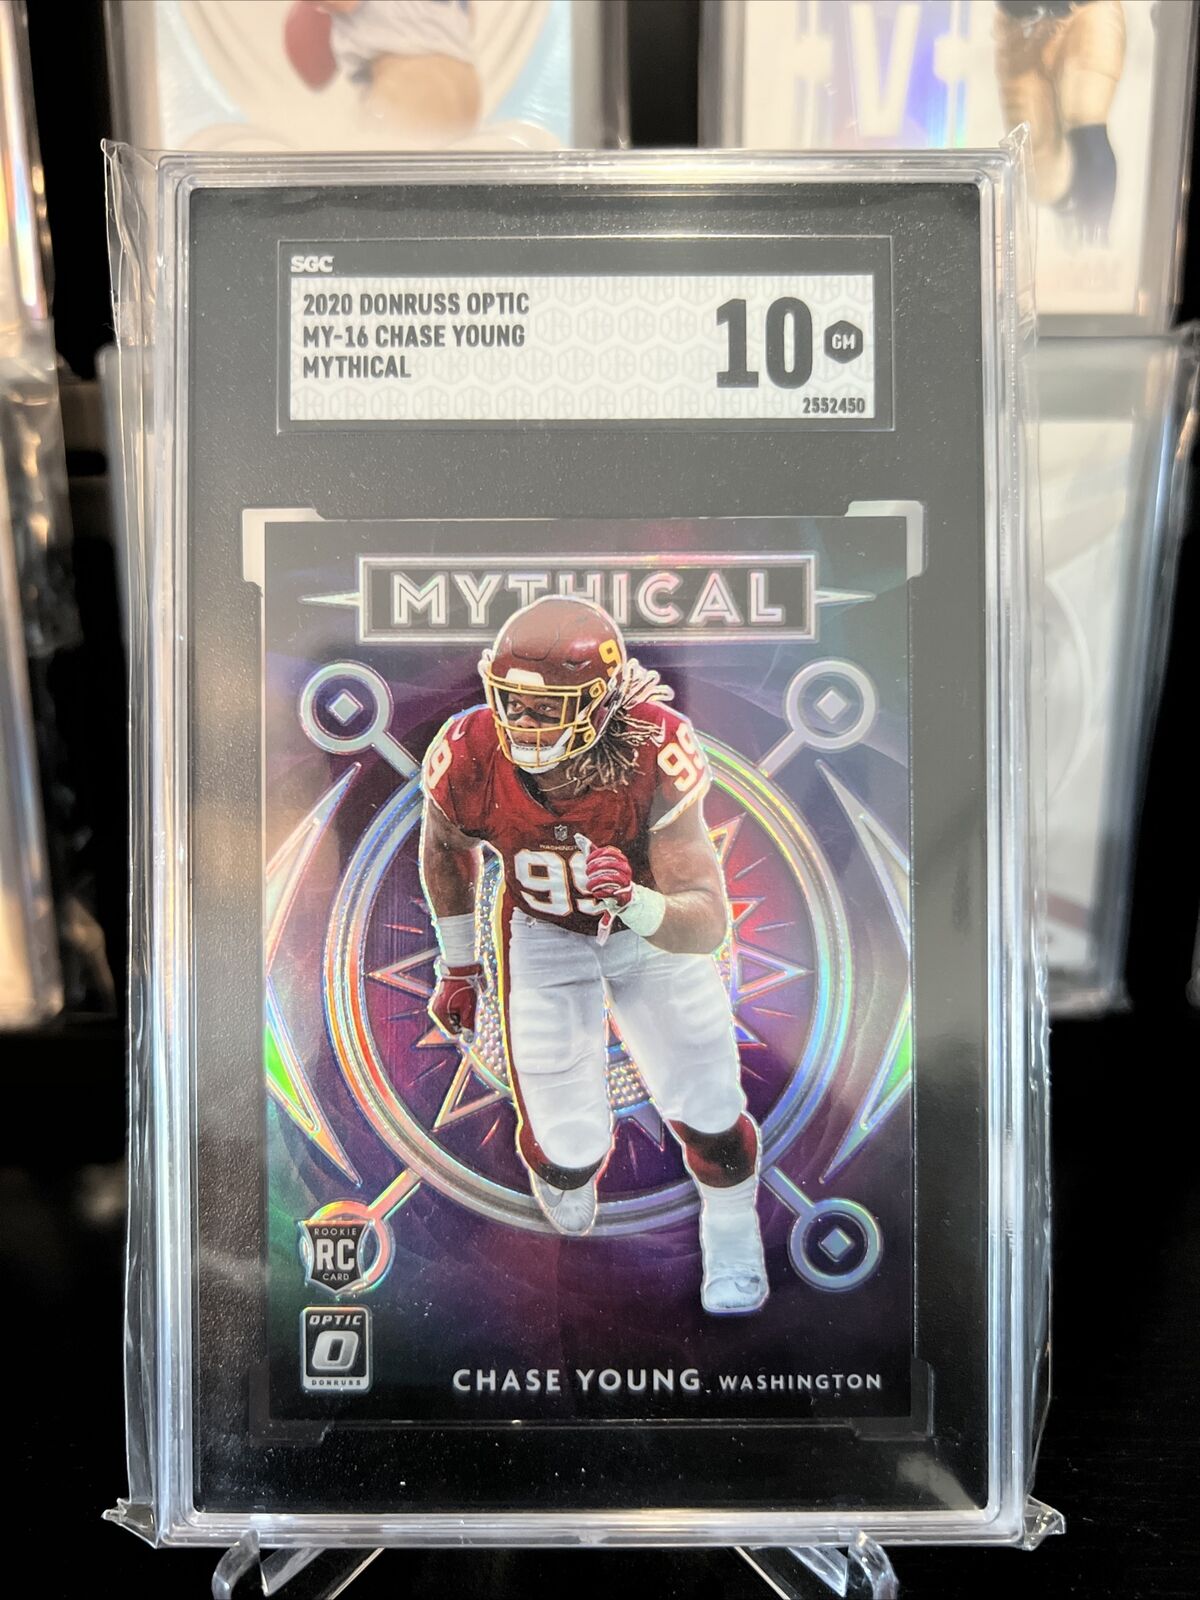 2020 Donruss Optic Chase Young Mythical RC SGC 10 Commanders